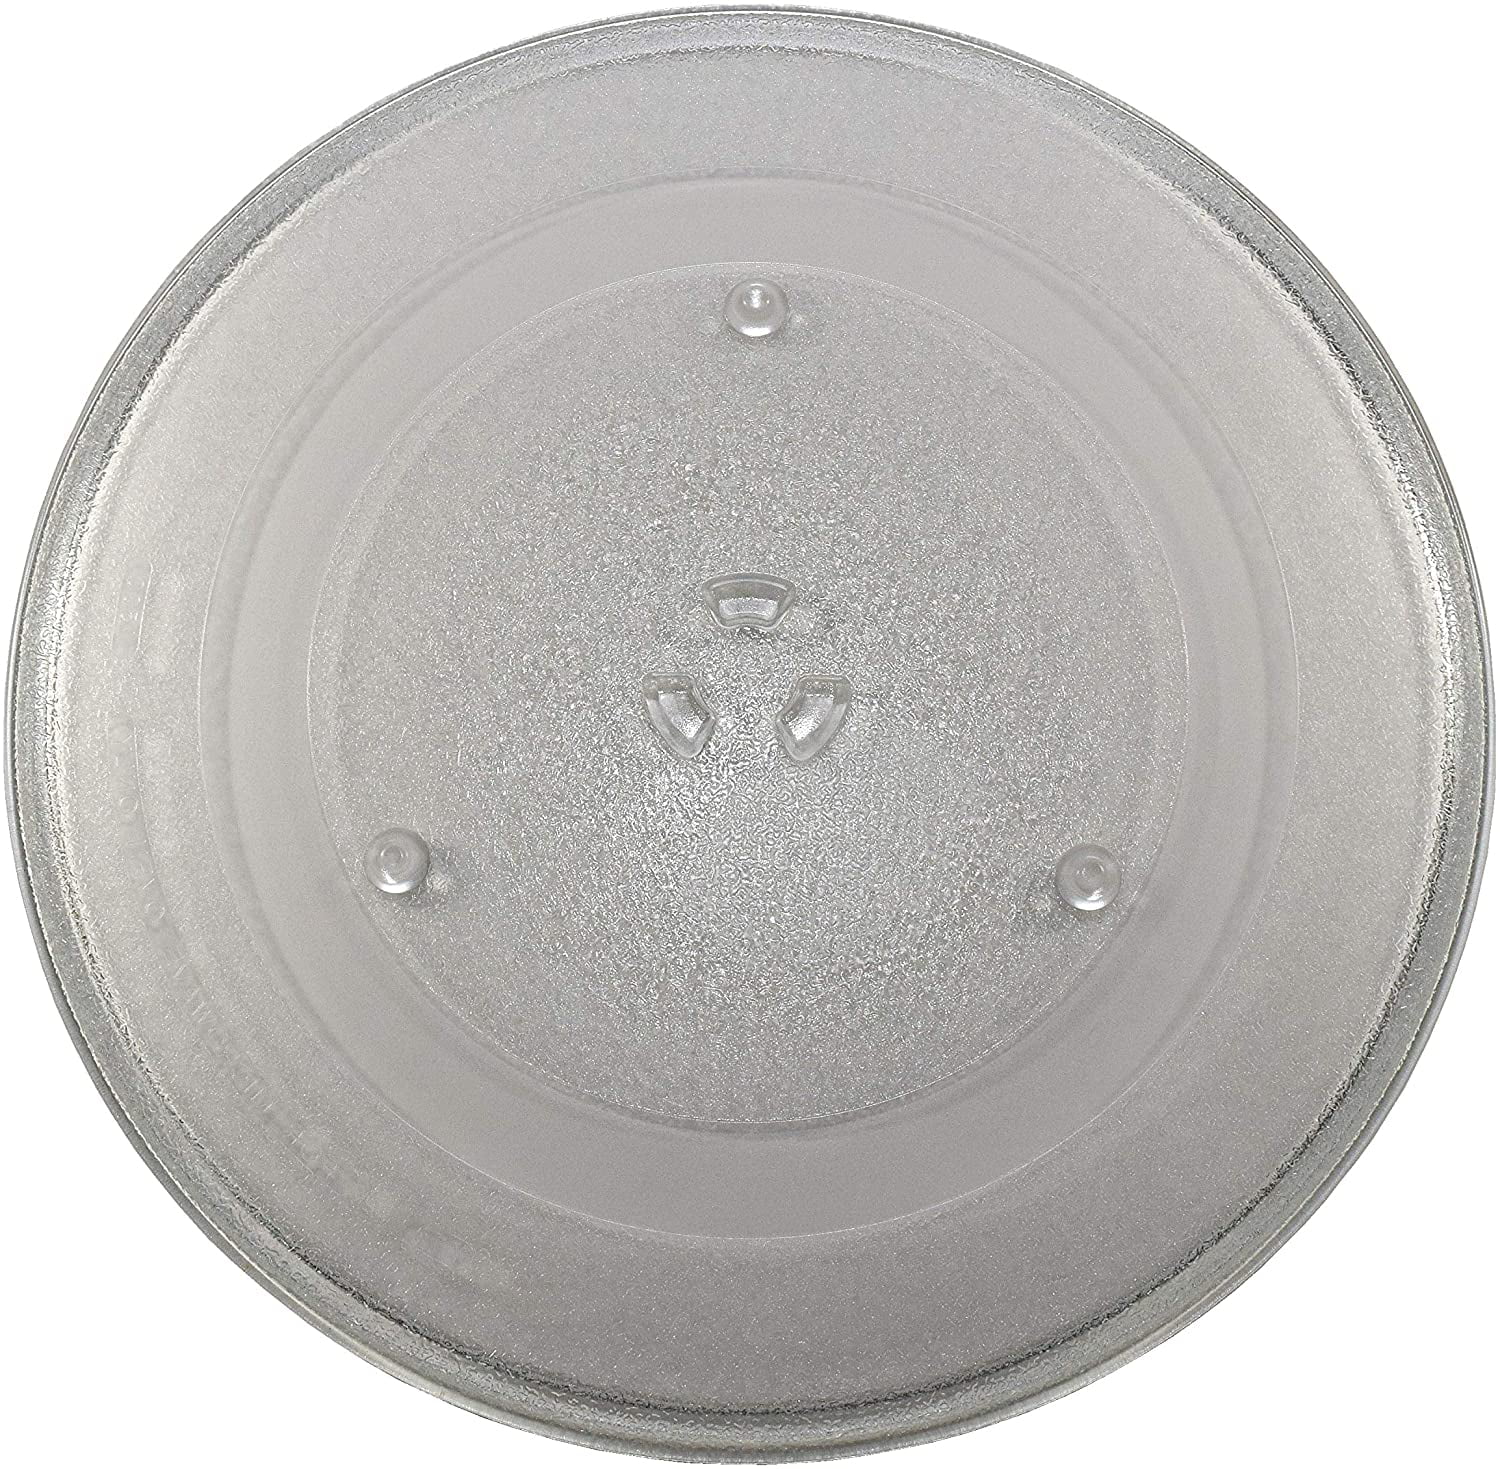 For Whirlpool MWV10S Microwave Replacement Glass Turntable Plate 